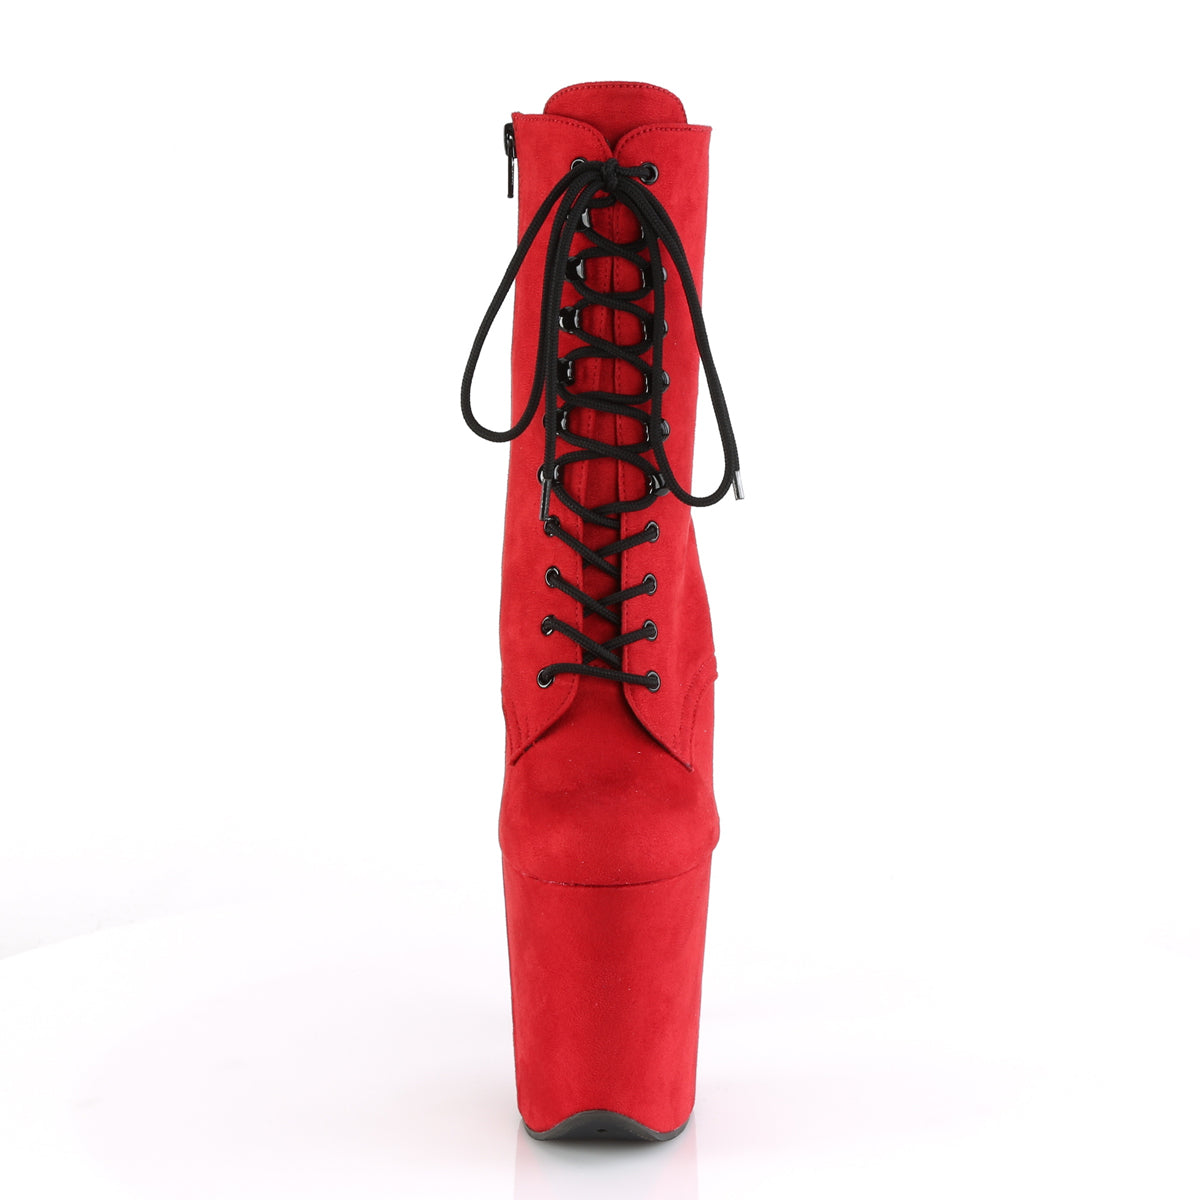 FLAMINGO-1020FS Calf High Boots Red Multi view 5